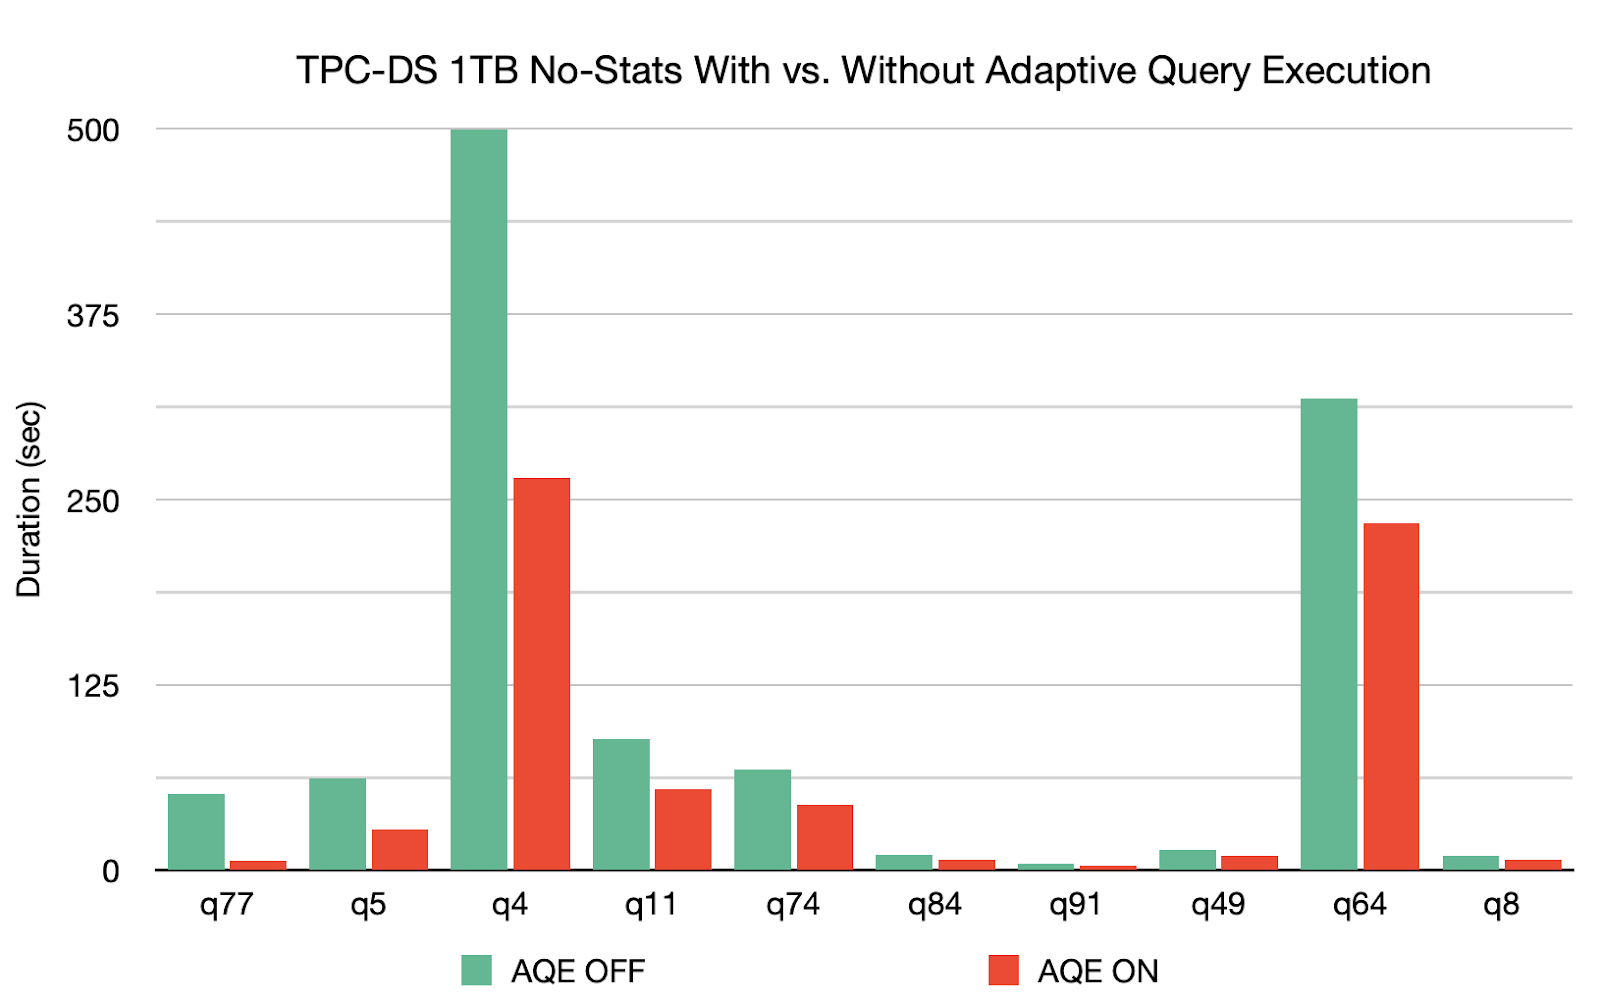 TPS-DS 1TB No-Statistics with vs. without Adaptive Query Execution.